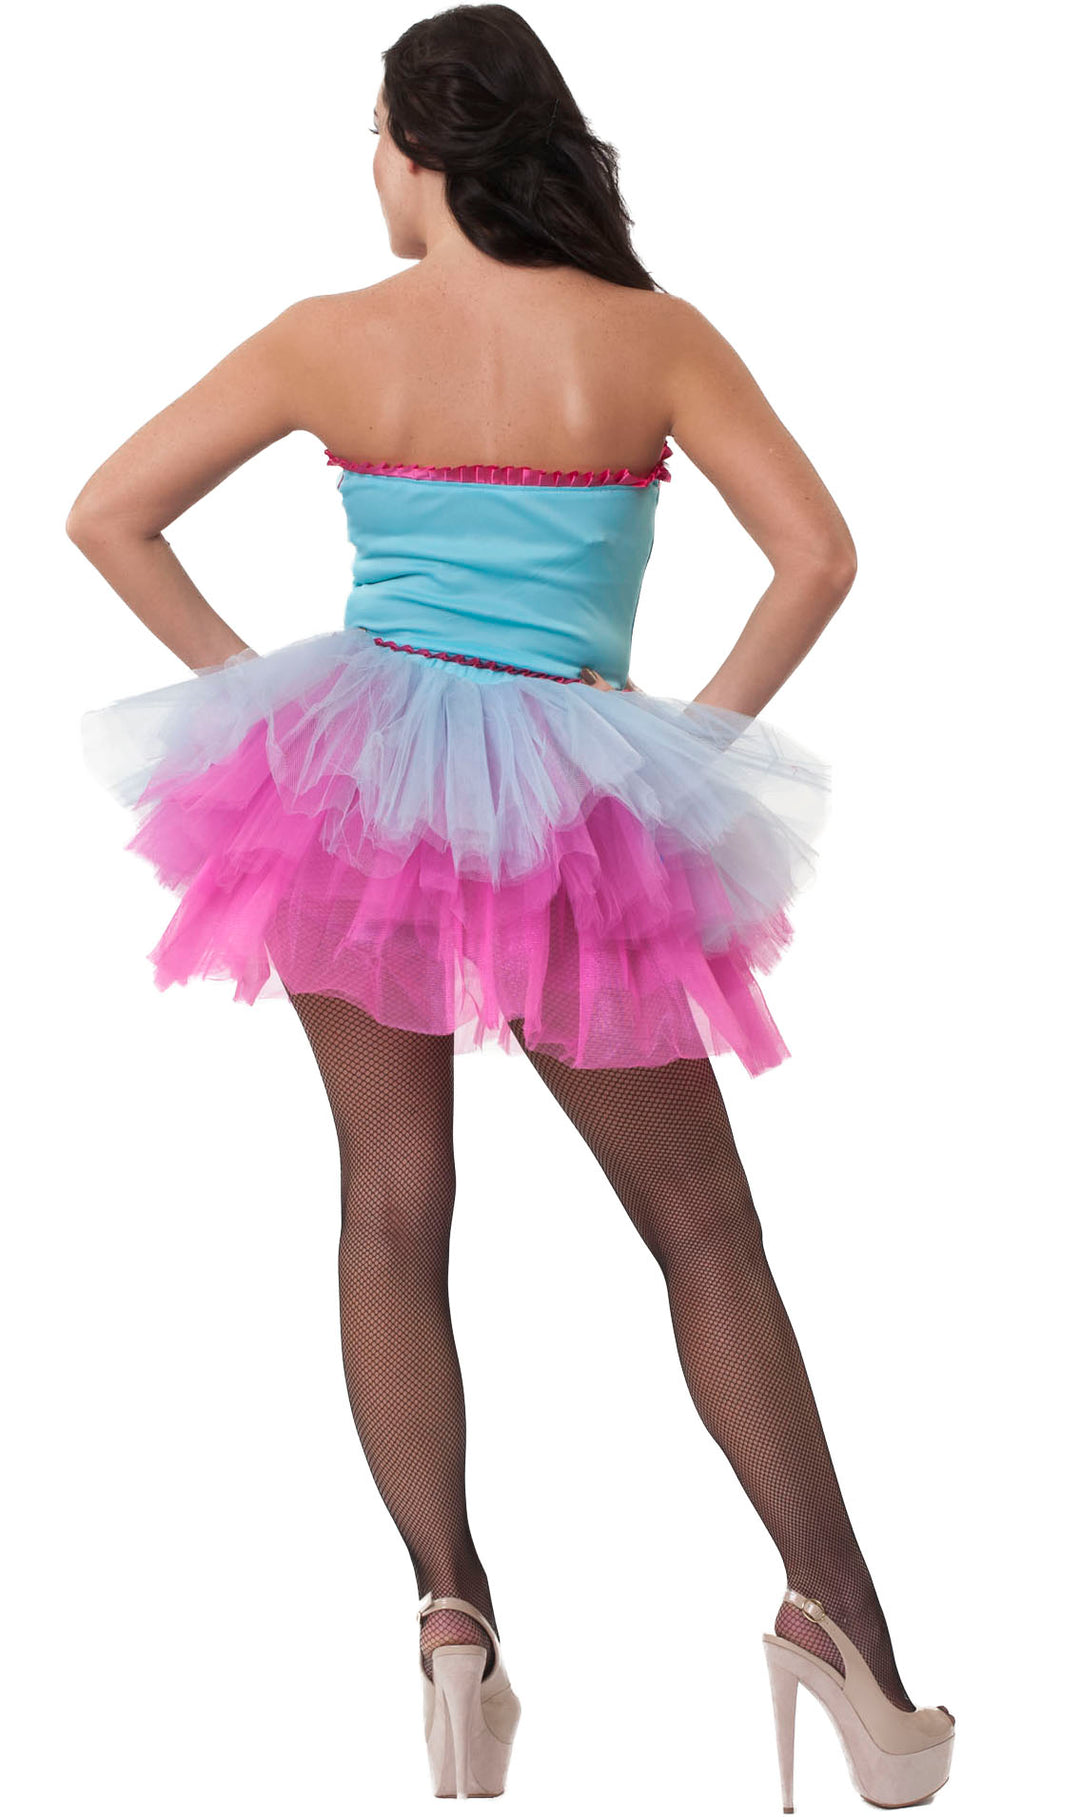 Ladies Silky Smooth Showgirl Burlesque Fancy Dress Costume